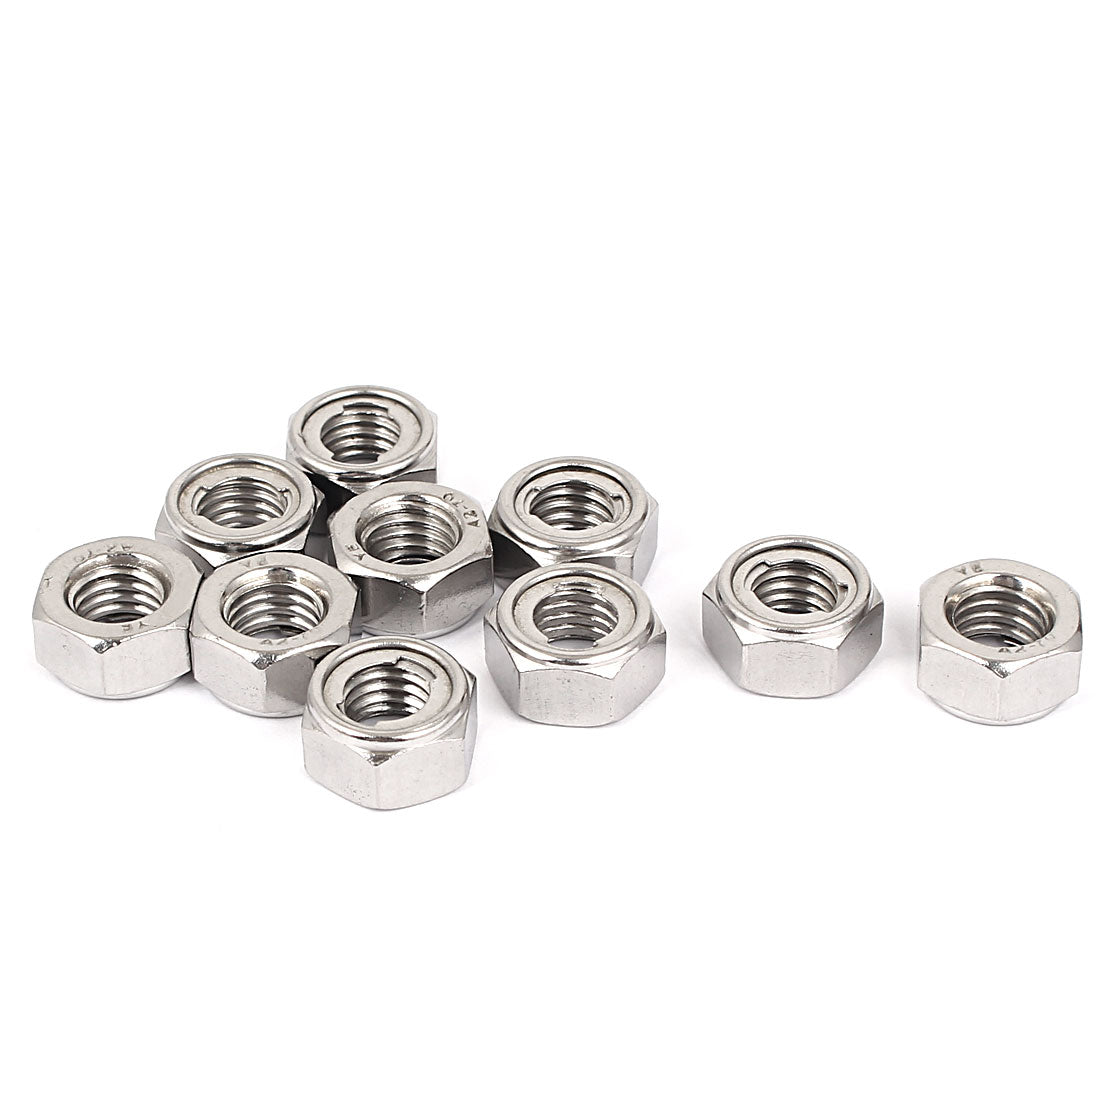 Uxcell Uxcell M4 304 Stainless Steel Self-Locking Metal Insert Hex Lock Nuts 10pcs